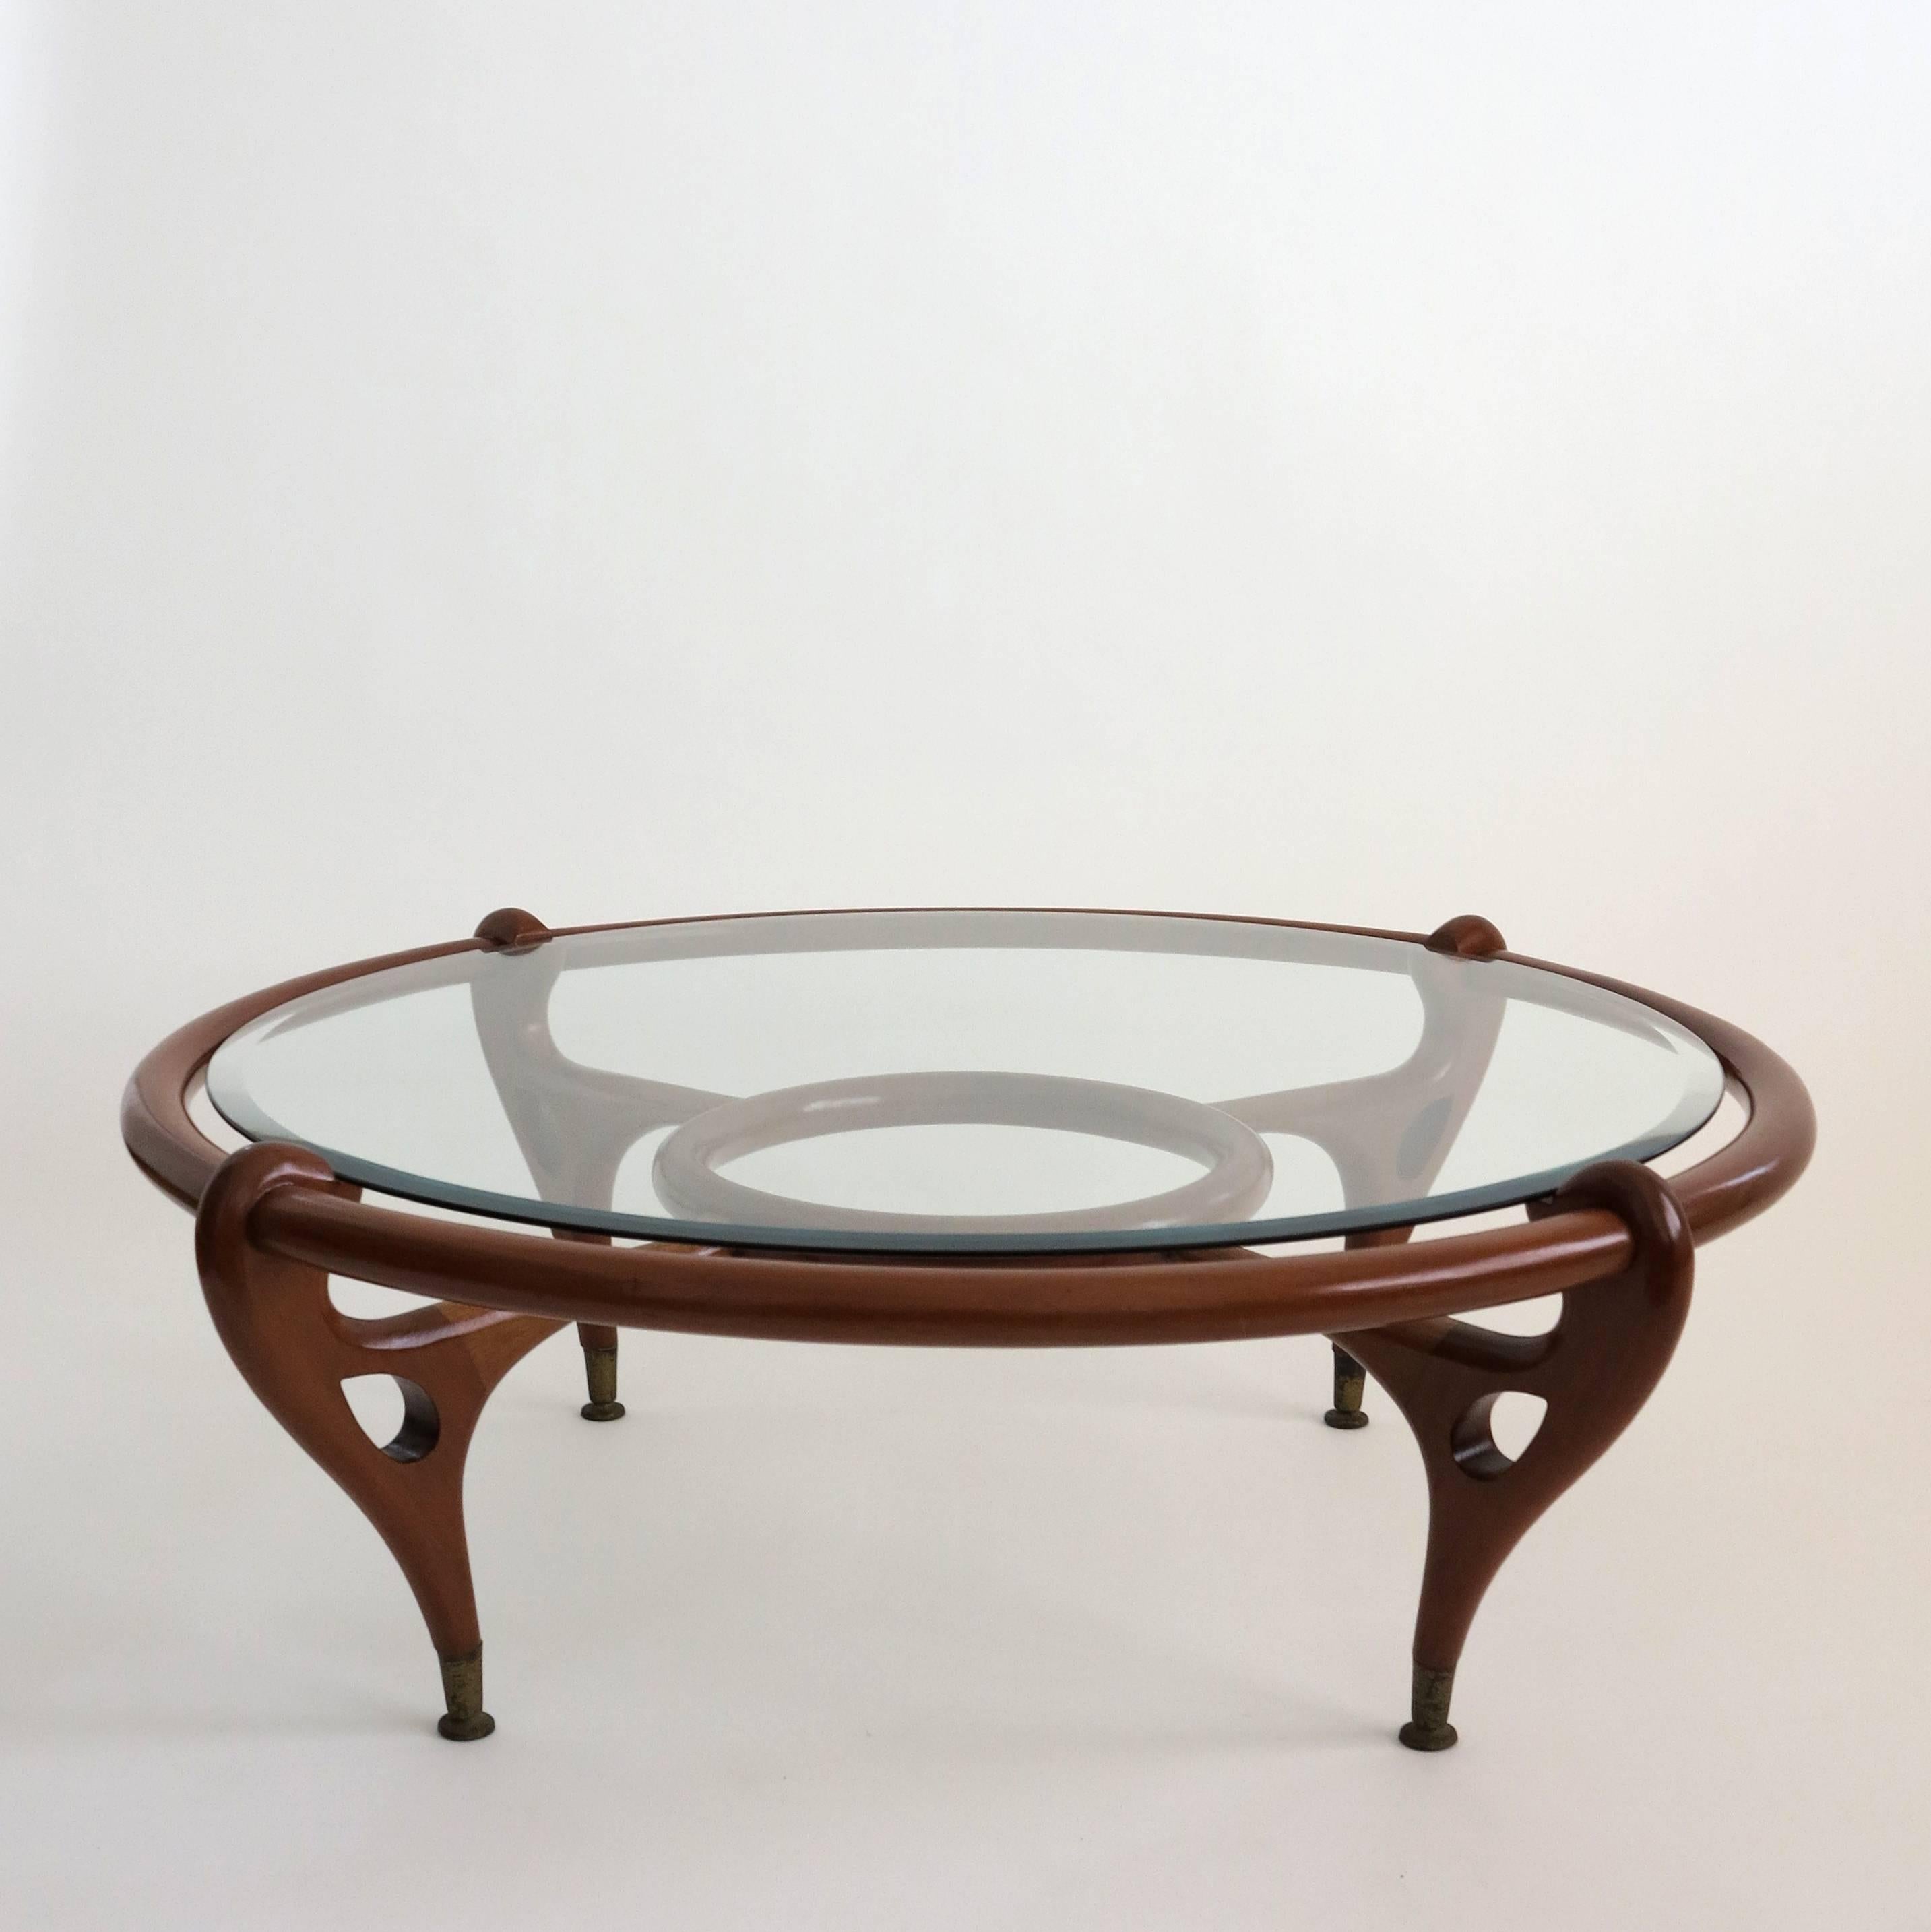 Elegant coffee table made in mahogany wood, with brass sabots and top of beveled glass, attributed to Eugenio Escudero.